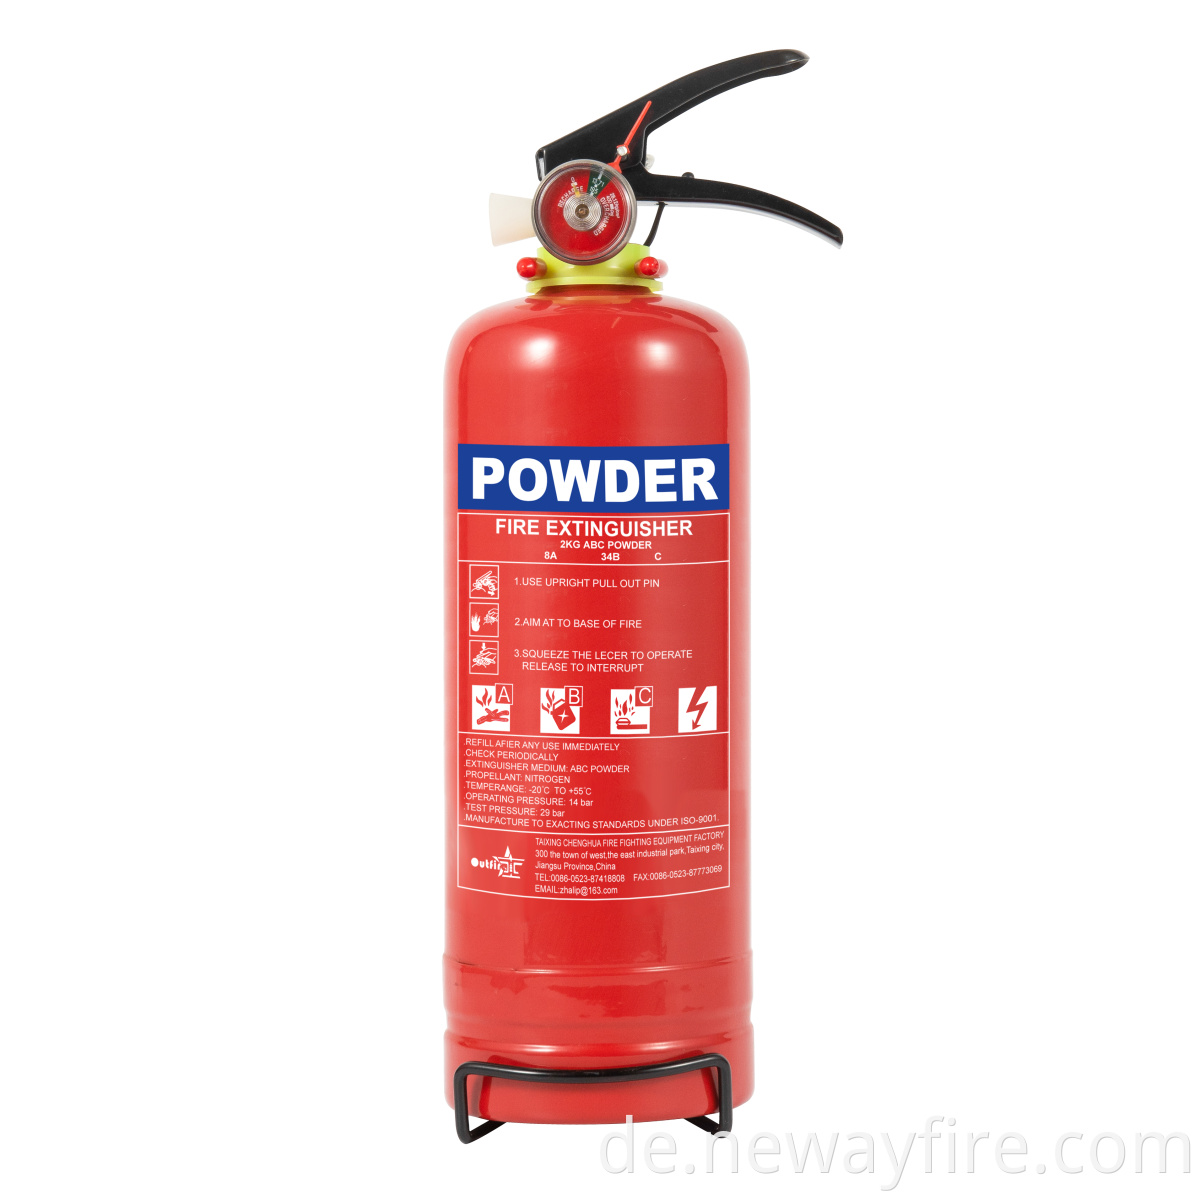 2Kg powder fire extinguisher for fire fighting